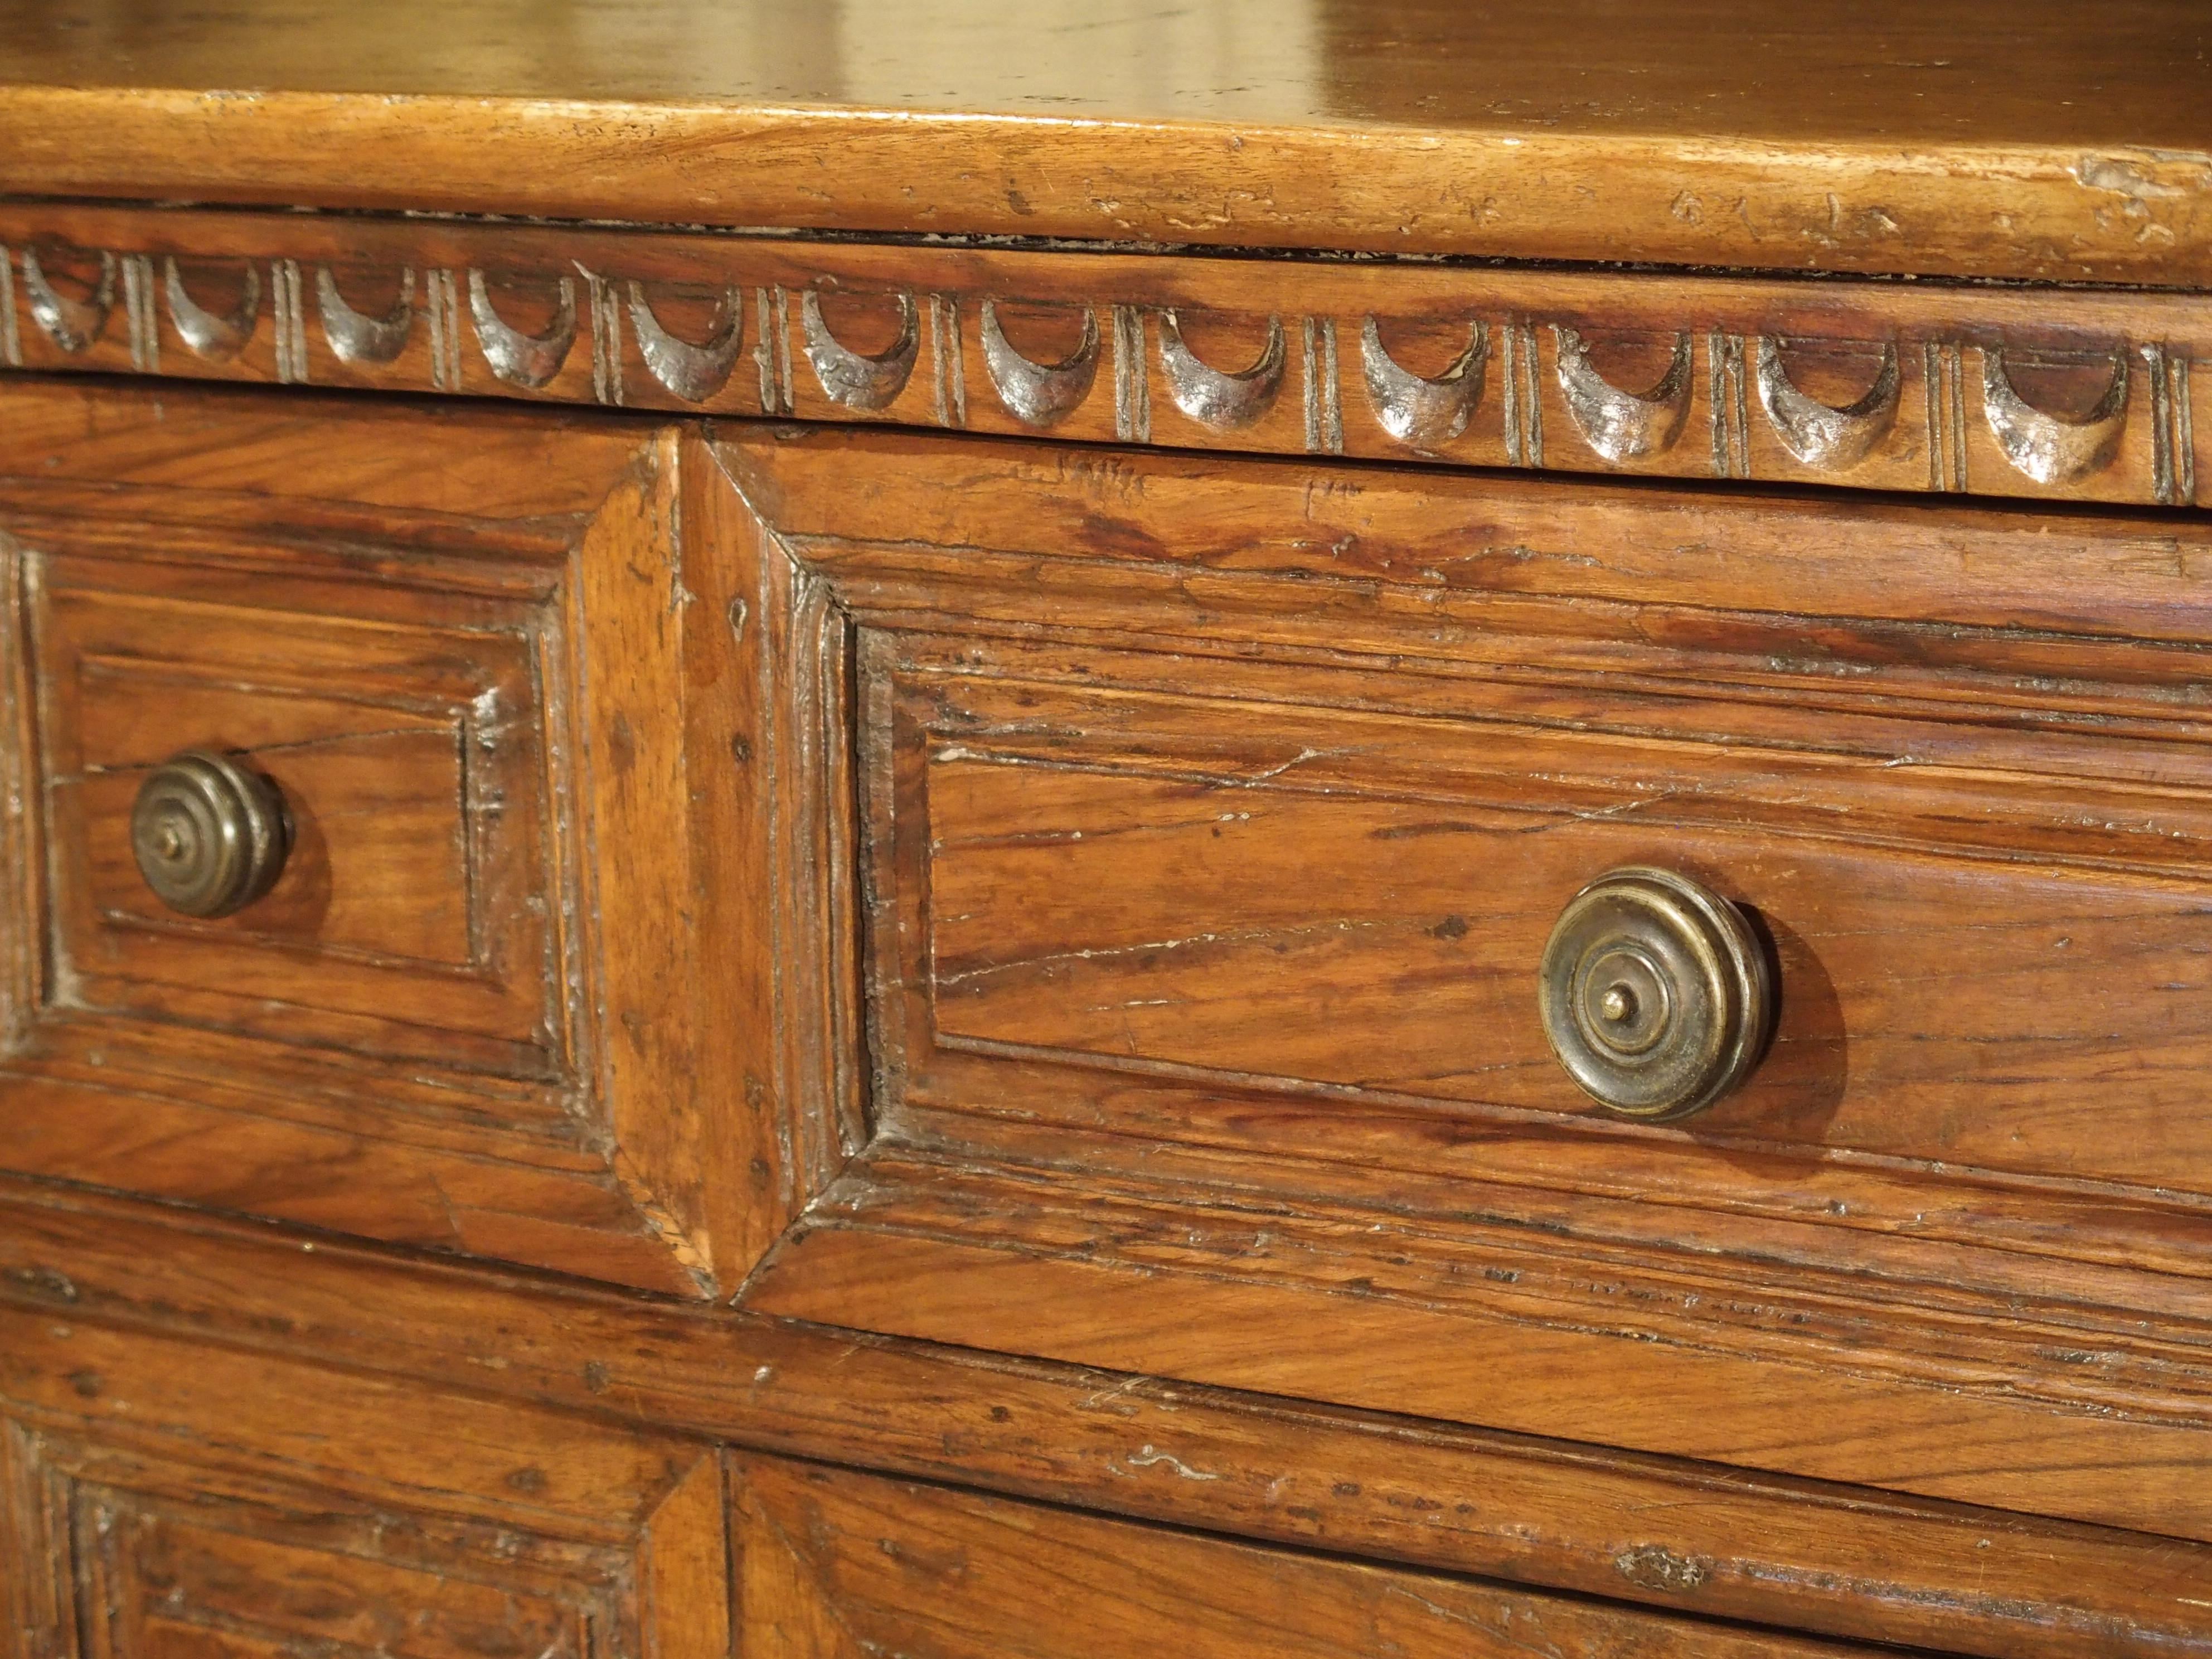 Hand-Carved 17th Century Italian Walnut Wood “Madia” Cabinet with Carved Bracket Base